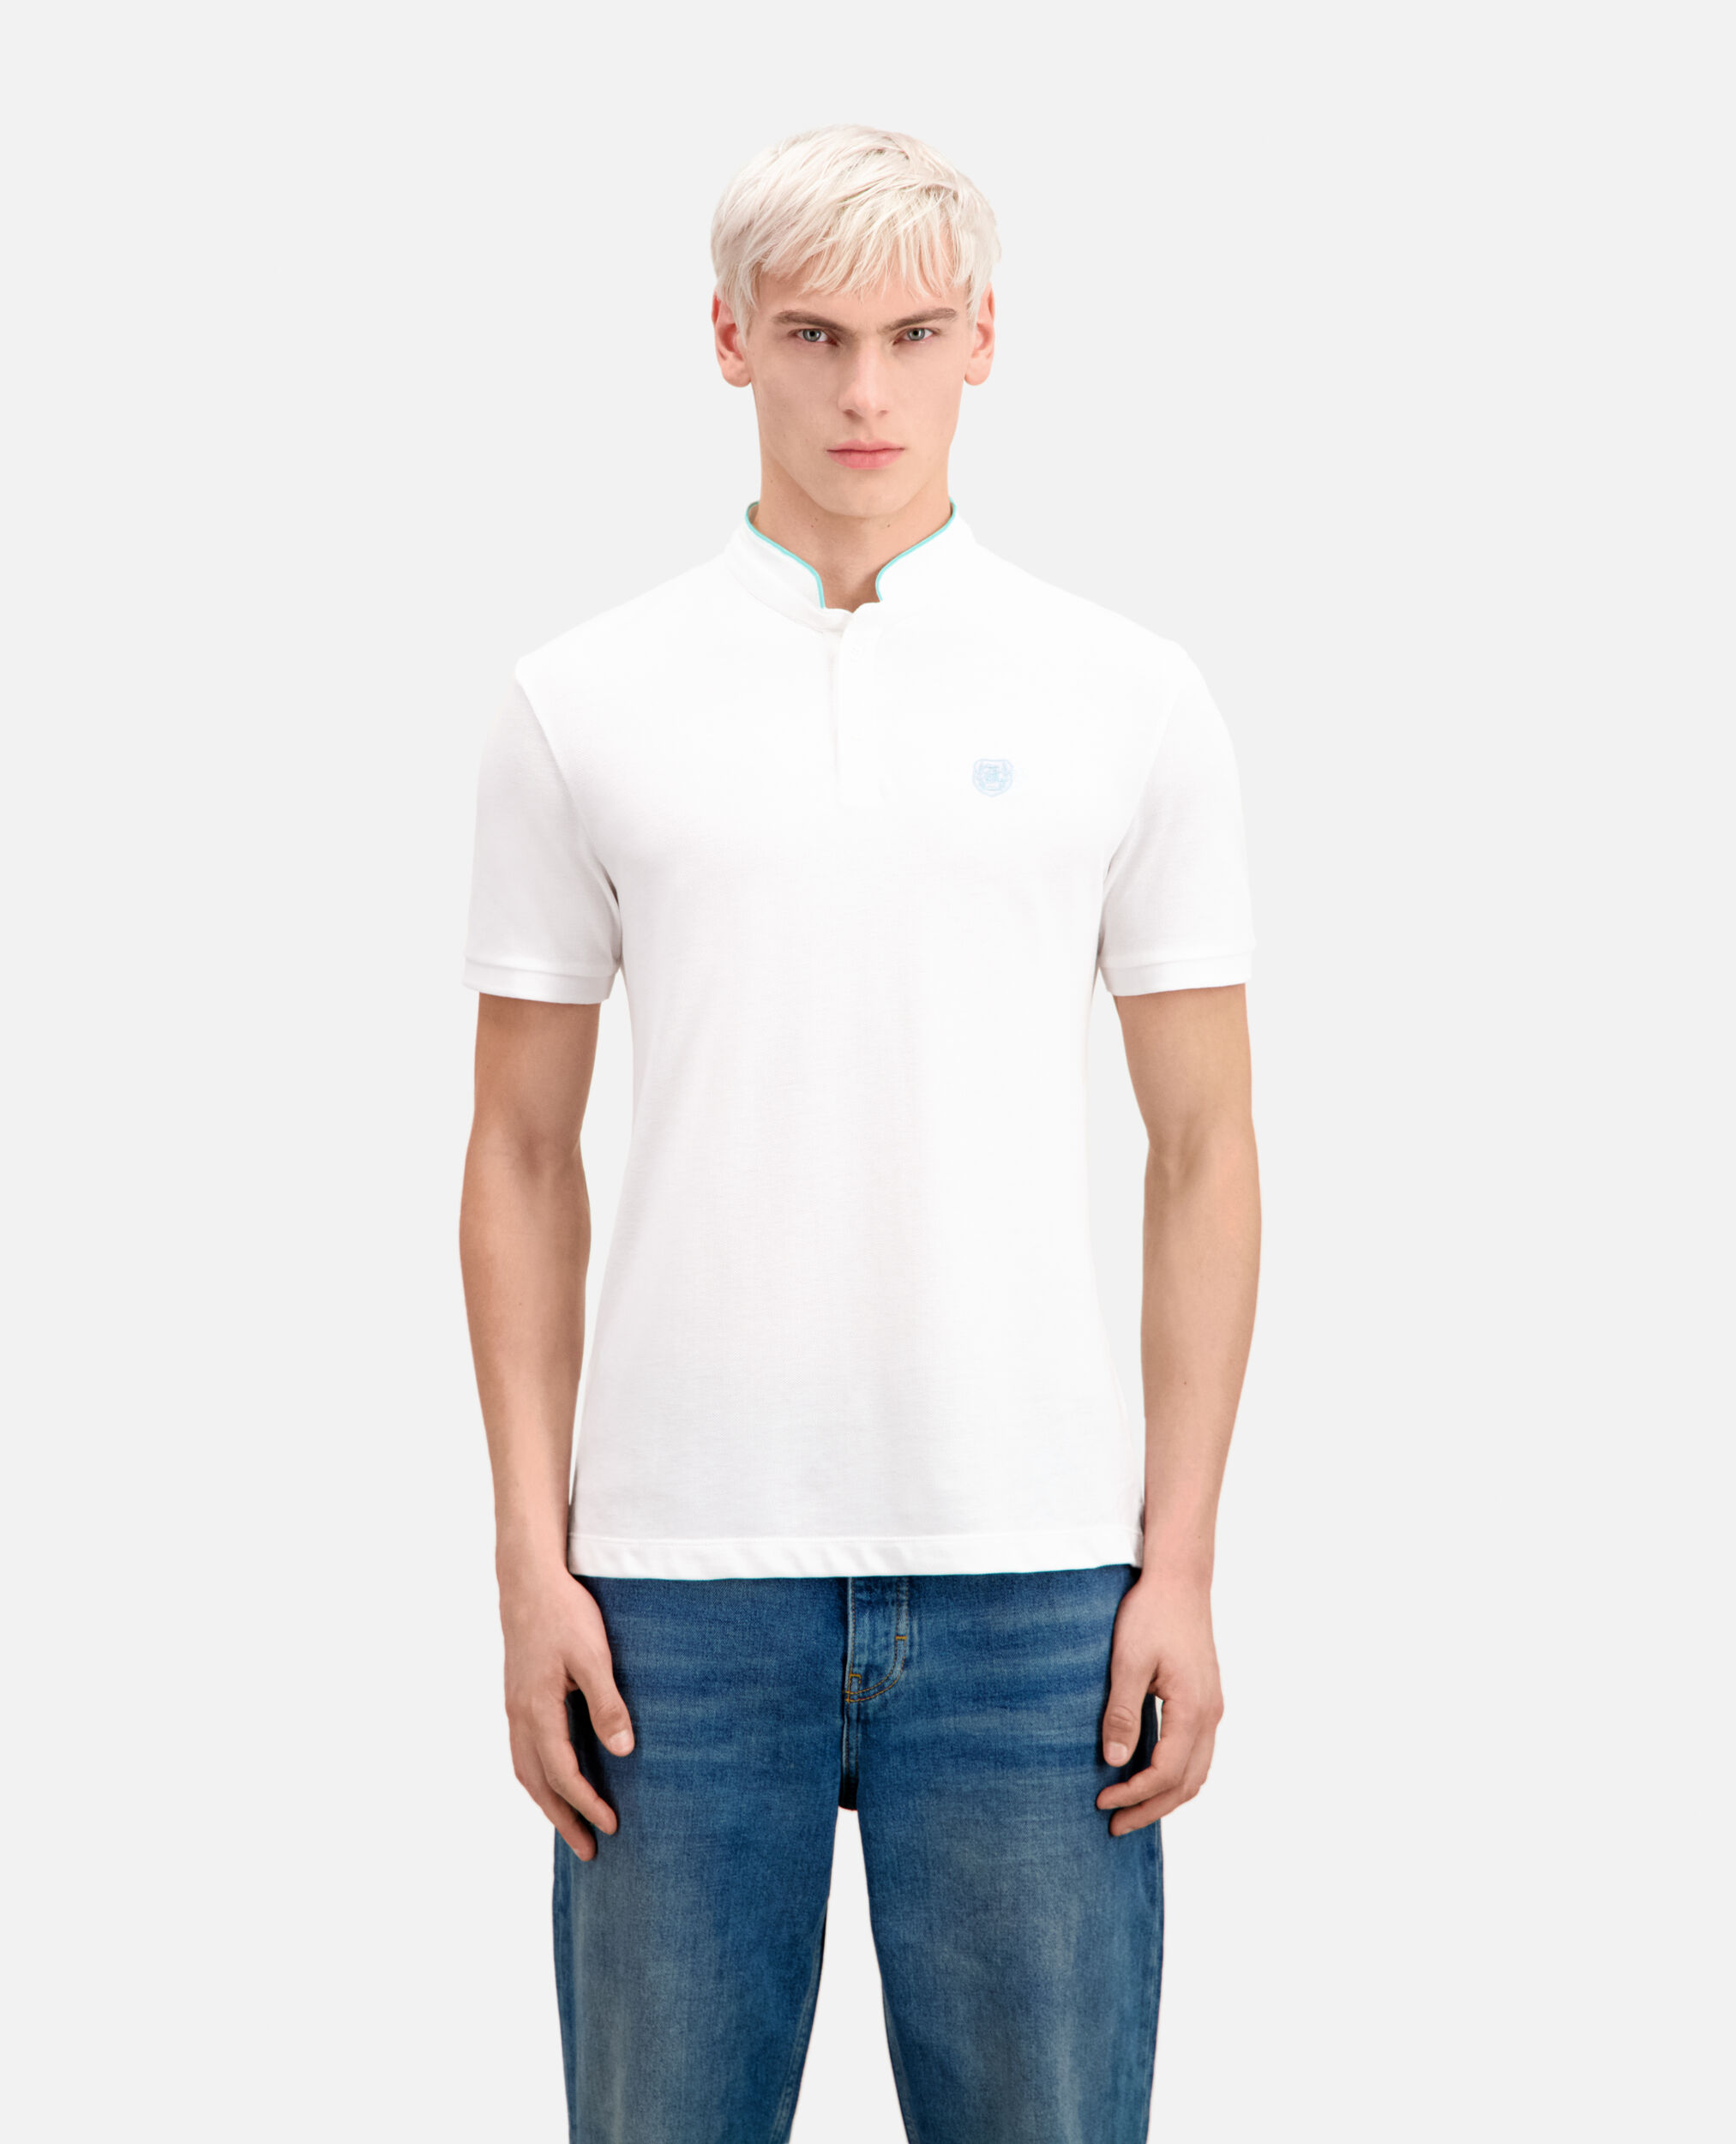 Camisa polo blanca algodón, WHITE / DUCK BLUE, hi-res image number null